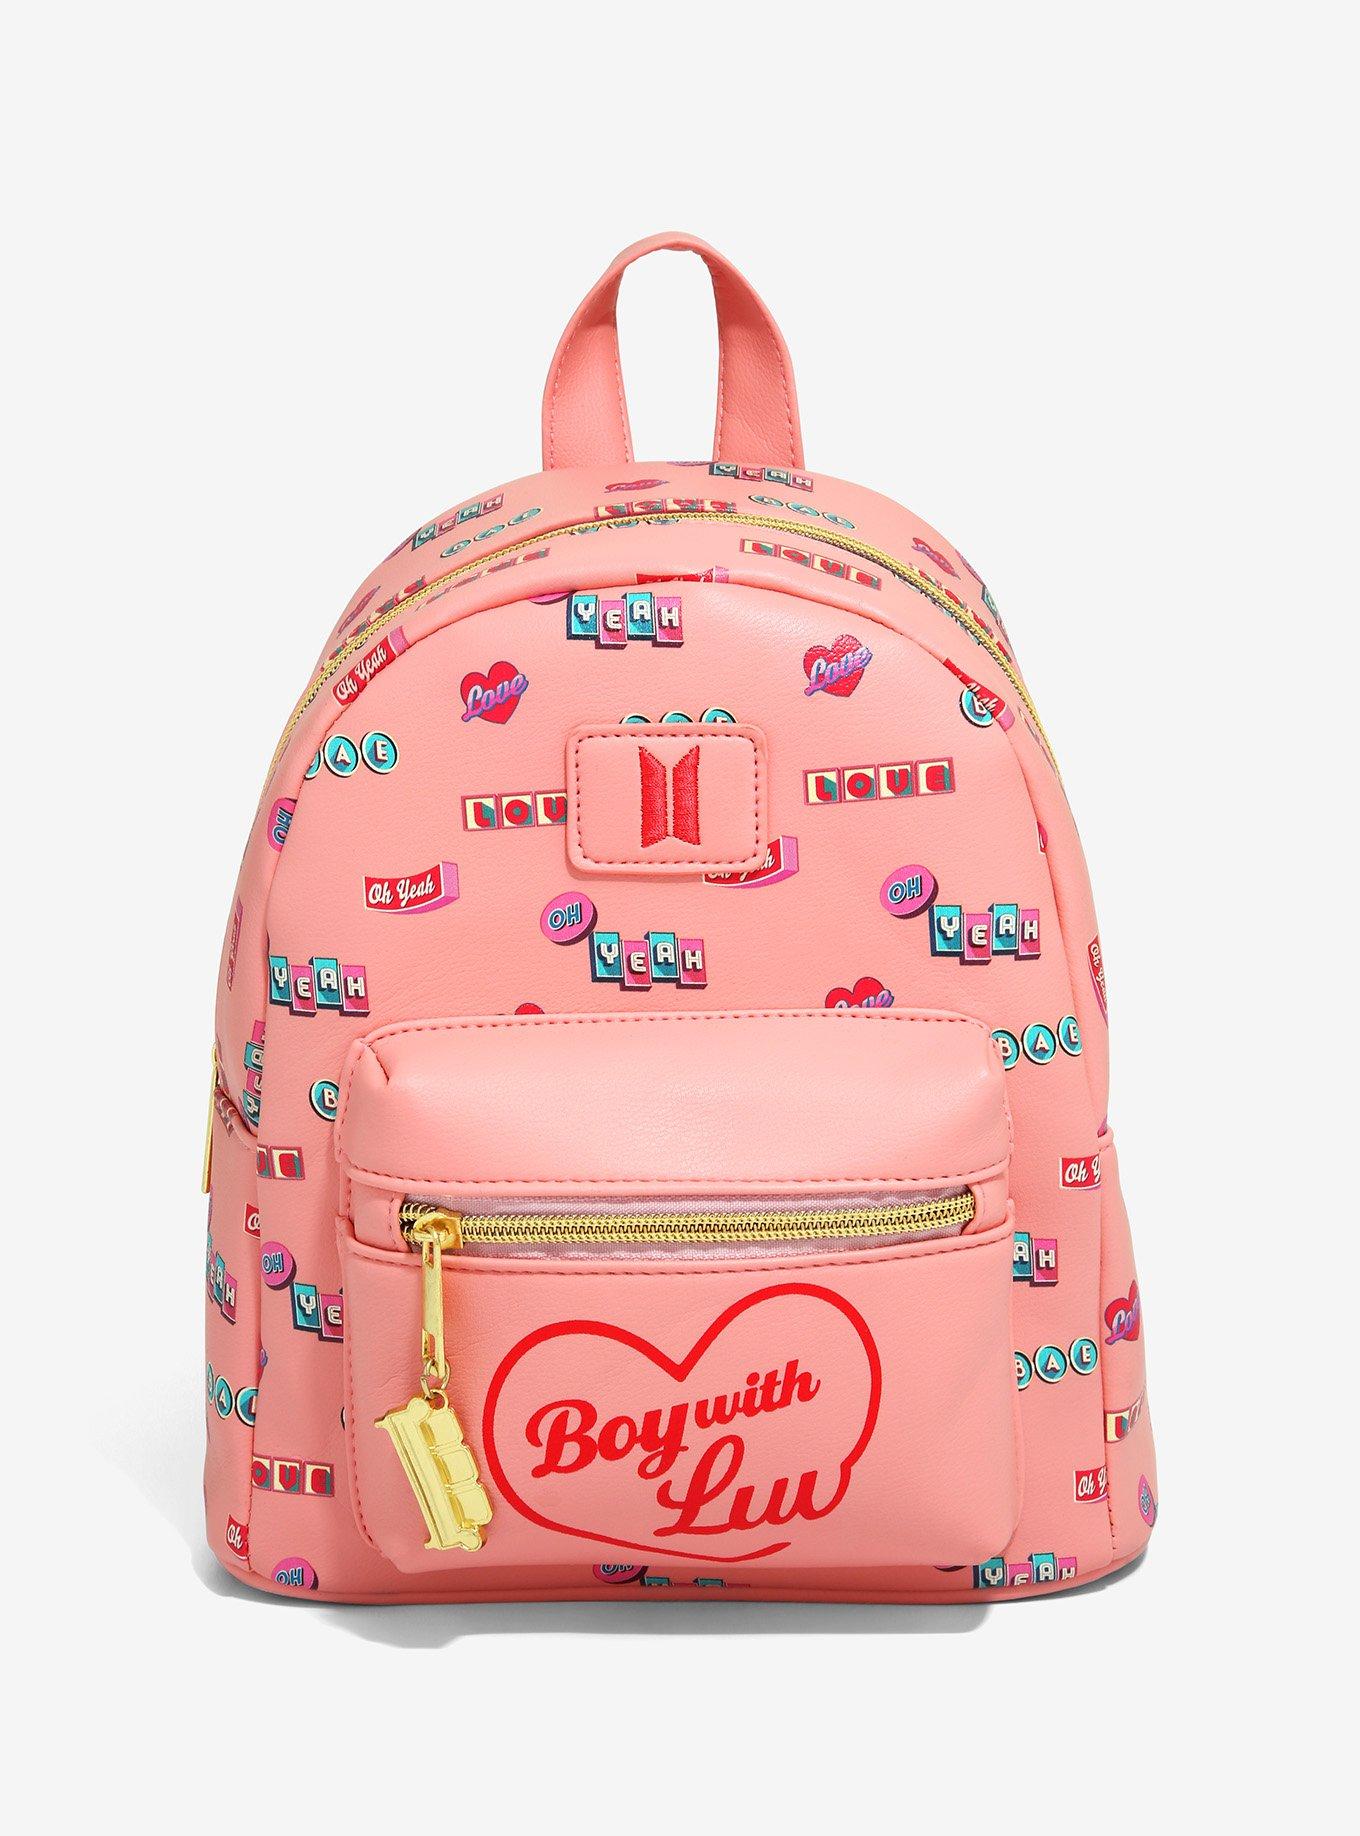 Buy ManalCorp BTS Backpack bags for Girls with Free 25 Piece BTS